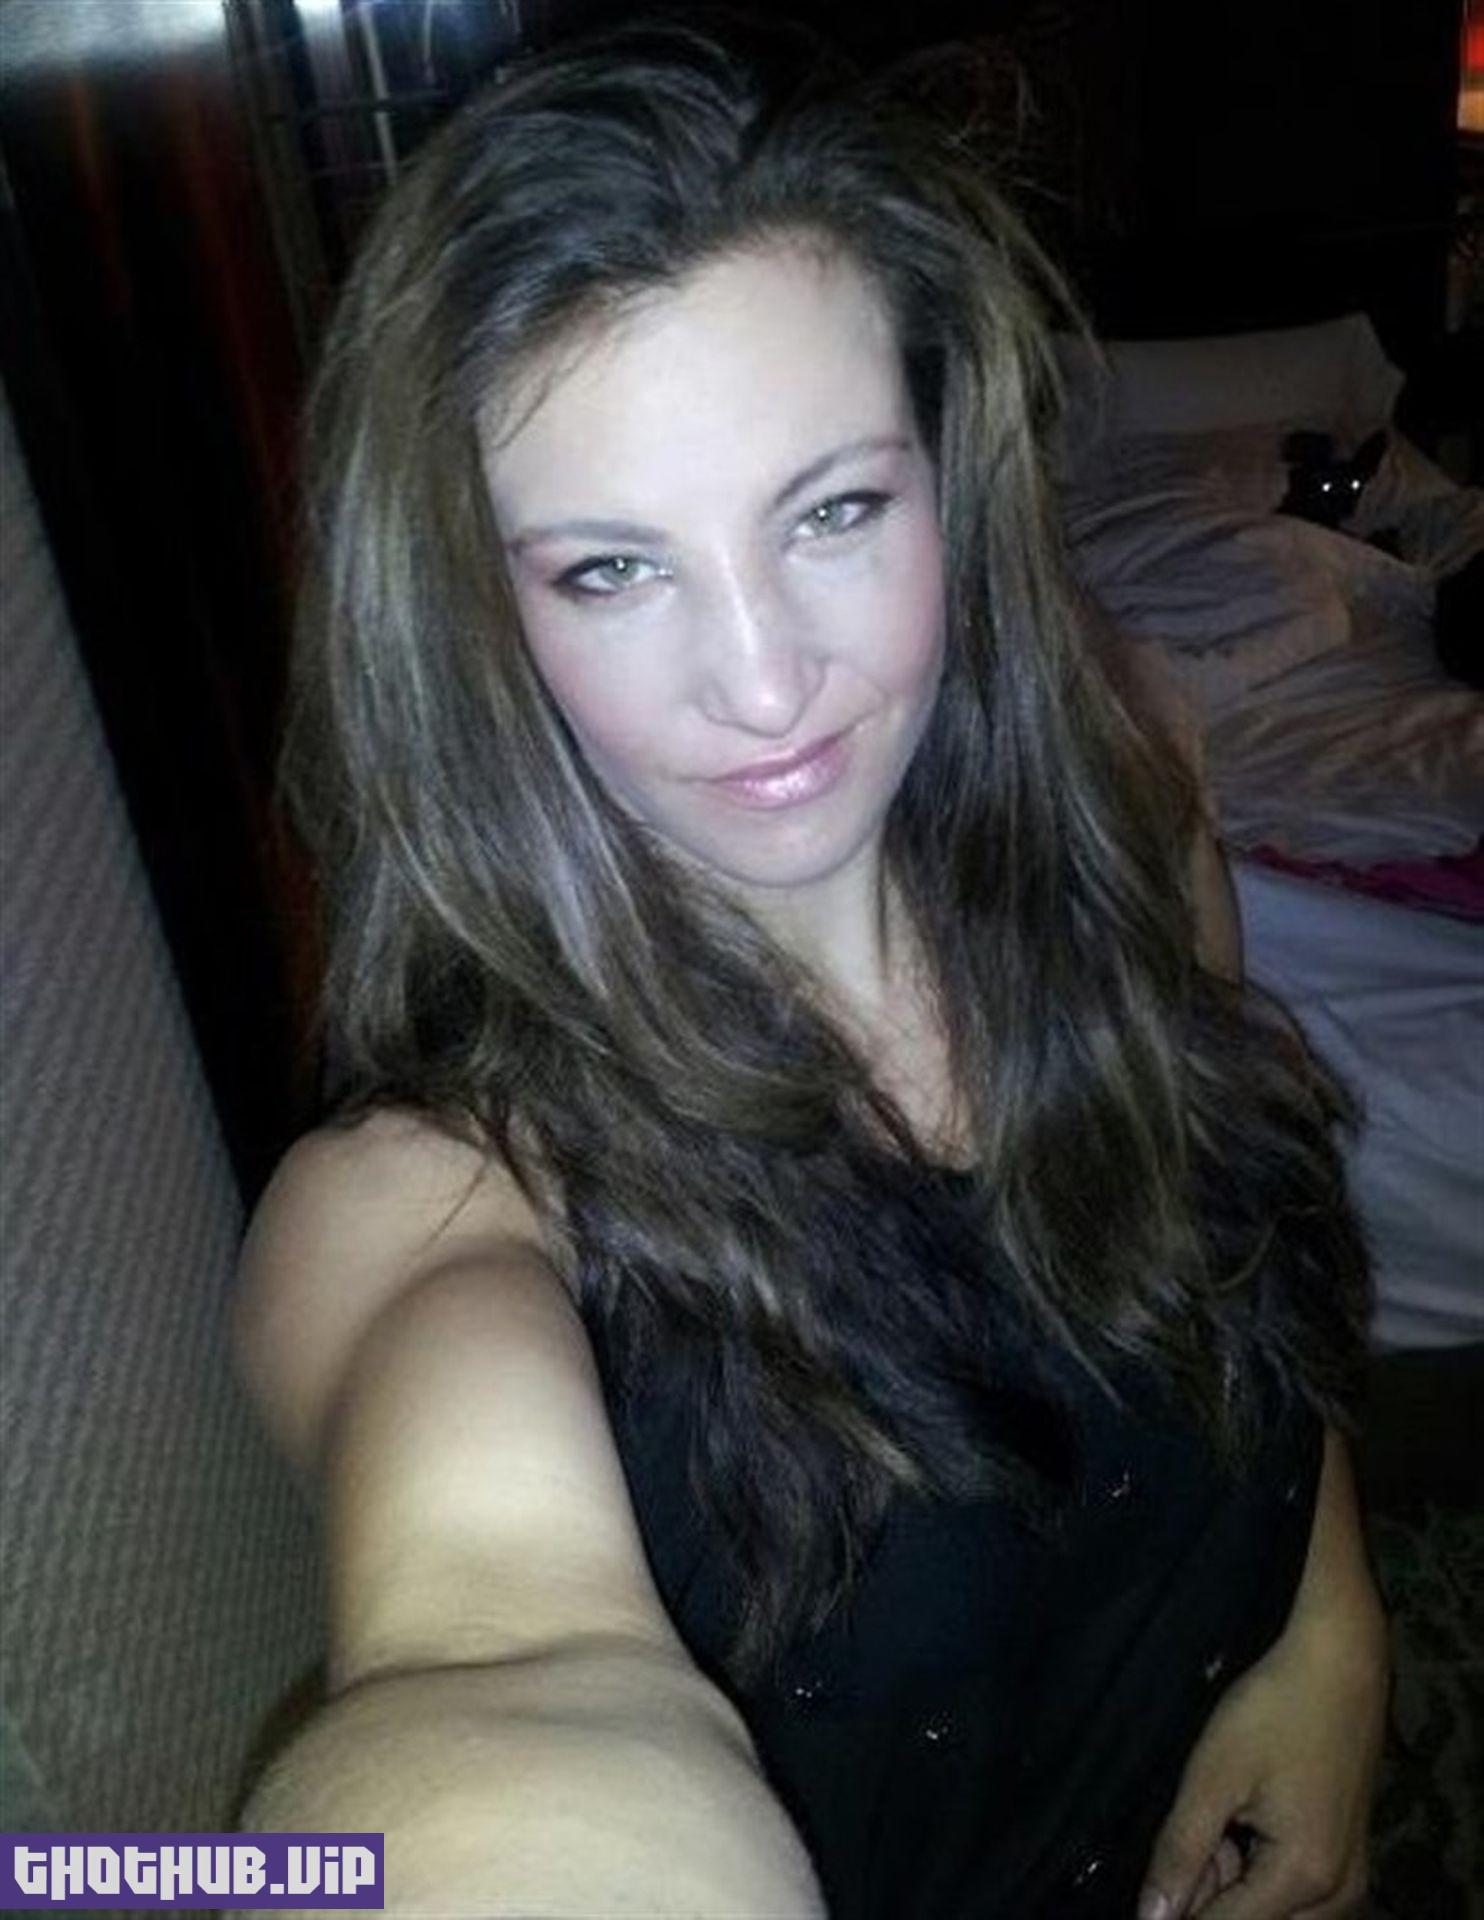 UFC champion Miesha Tate nude photos leaked from iCloud The Fappening